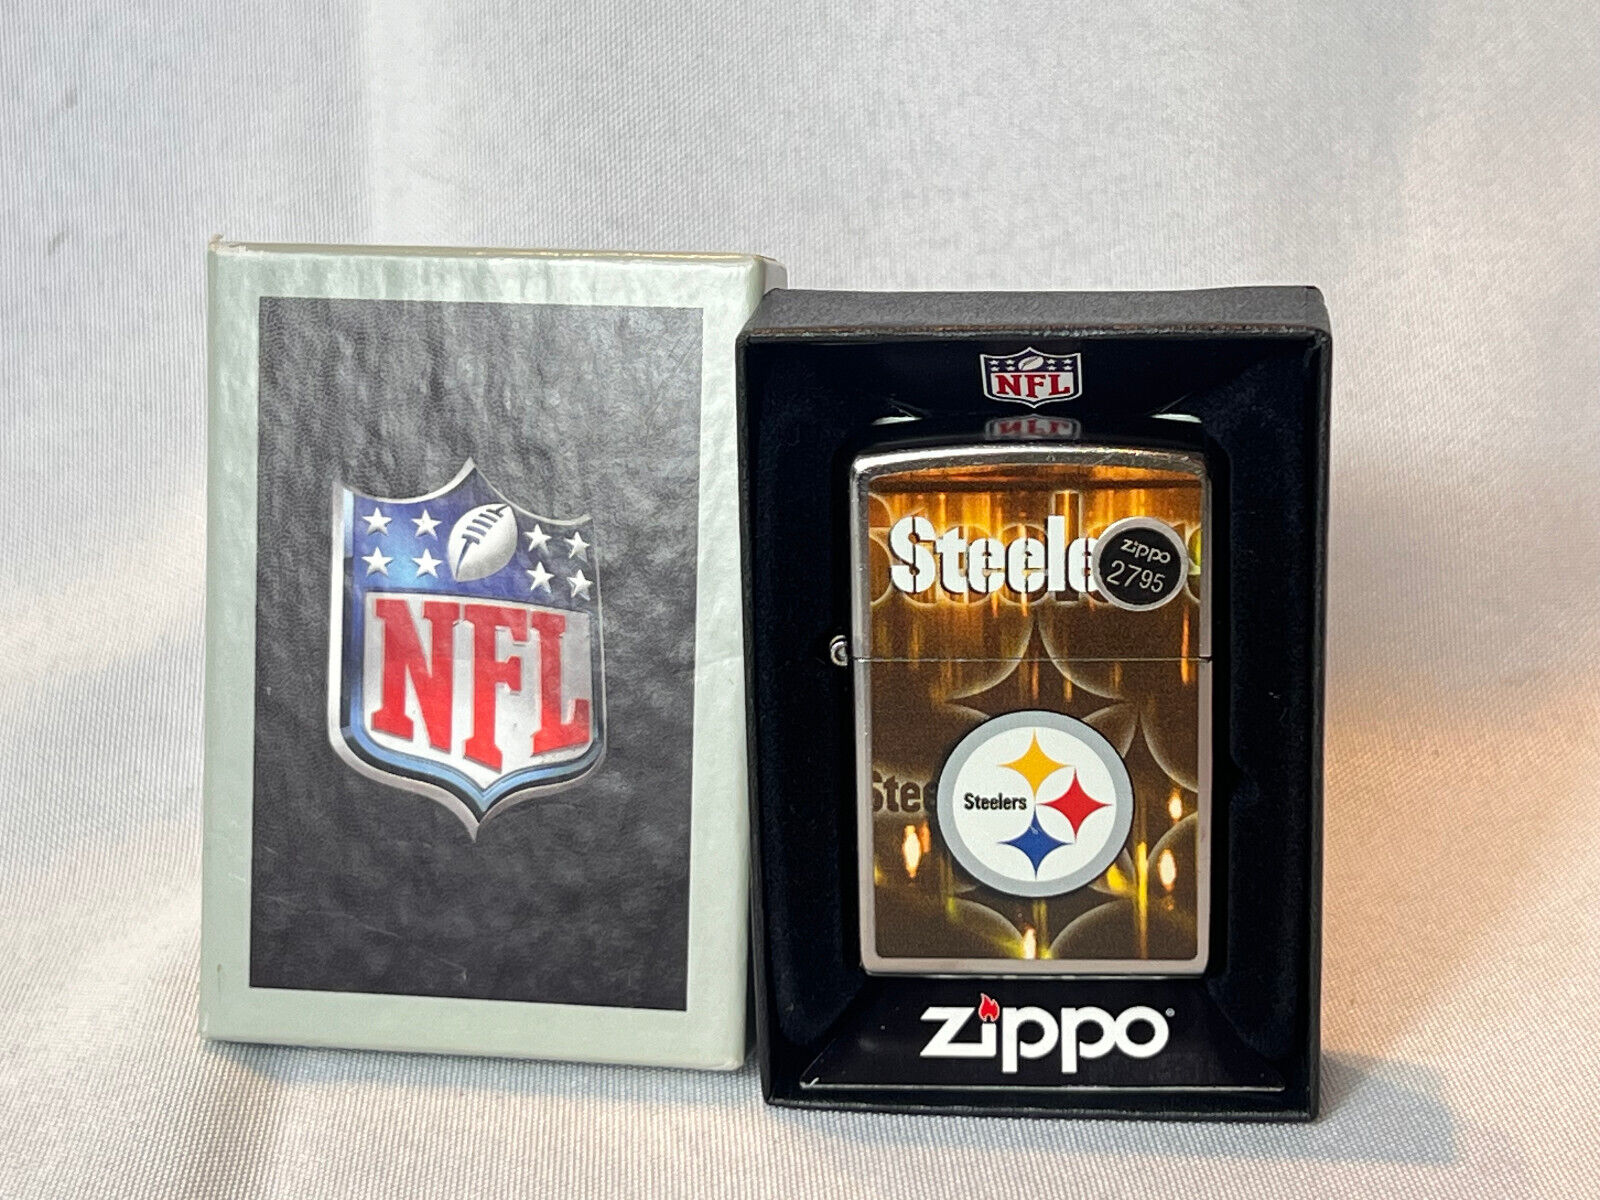 2016 Zippo Lighter NFL Pittsburg Steelers Unfired Sealed With Box